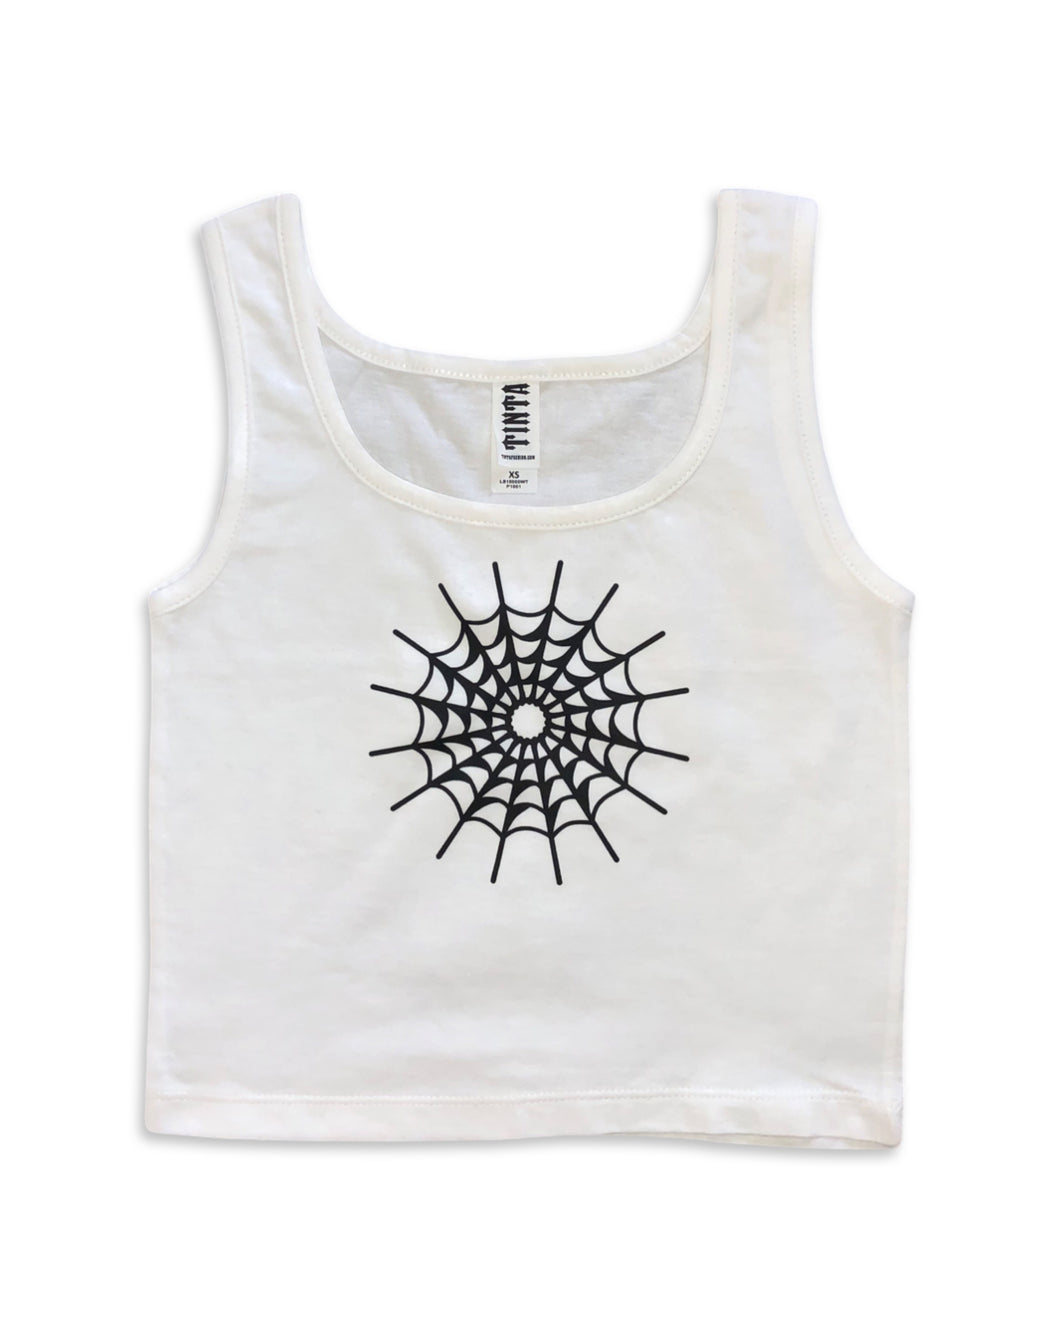 Spiderweb Cropped Tank Top